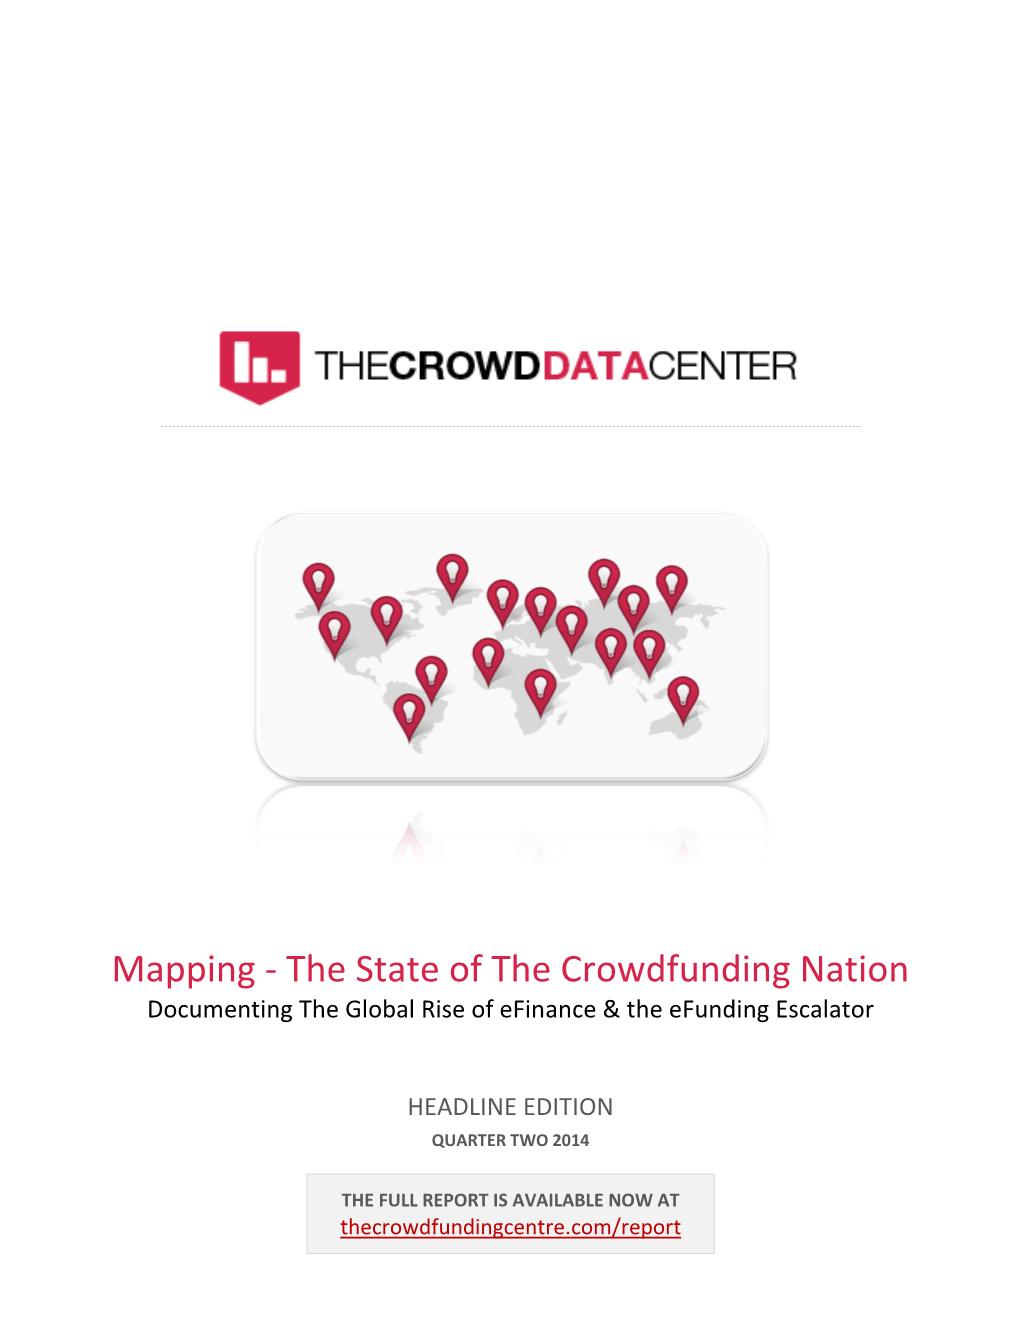 The State of the Crowdfunding Nation Documenting the Global Rise of Efinance & the Efunding Escalator